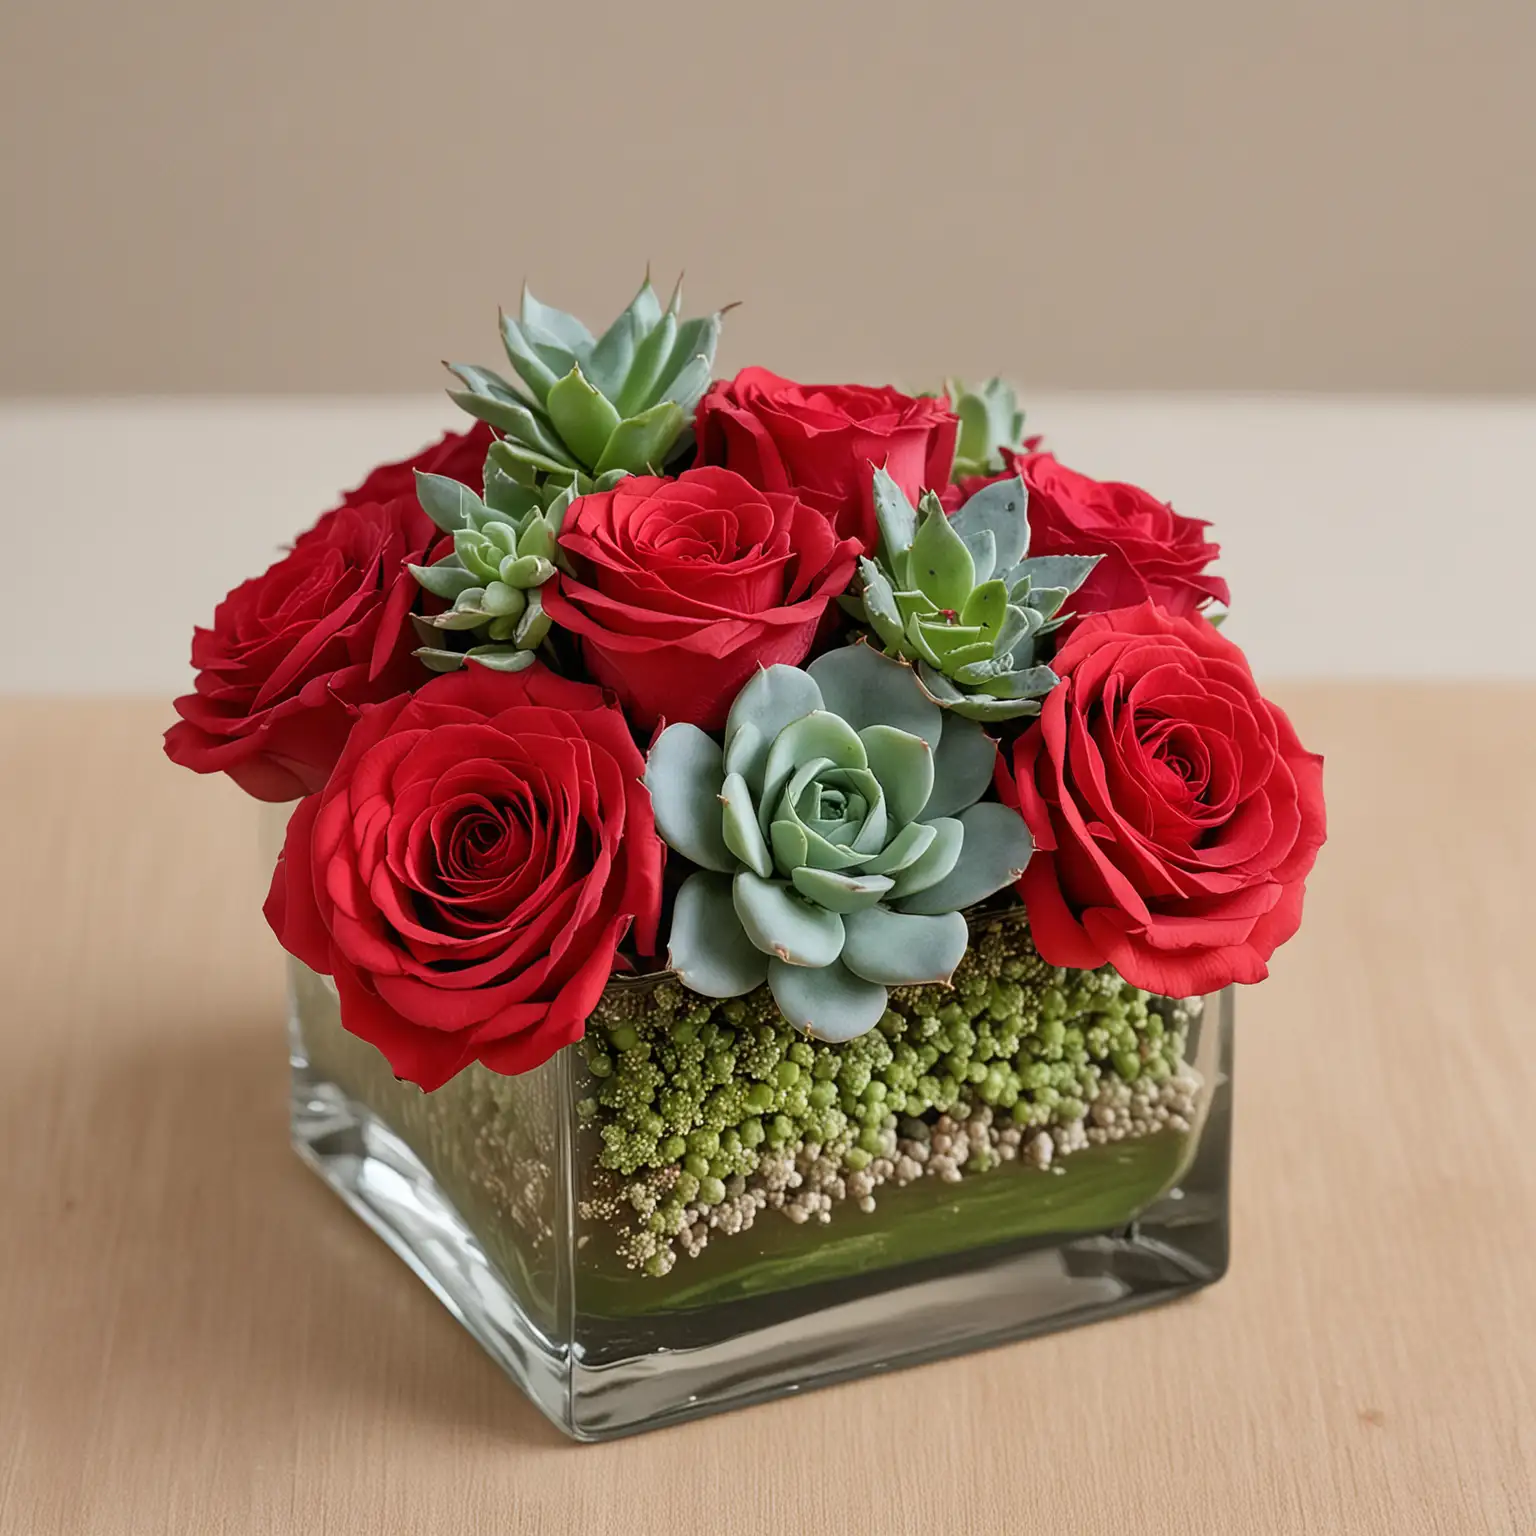 Elegant-Wedding-Centerpiece-with-Succulents-and-Red-Roses